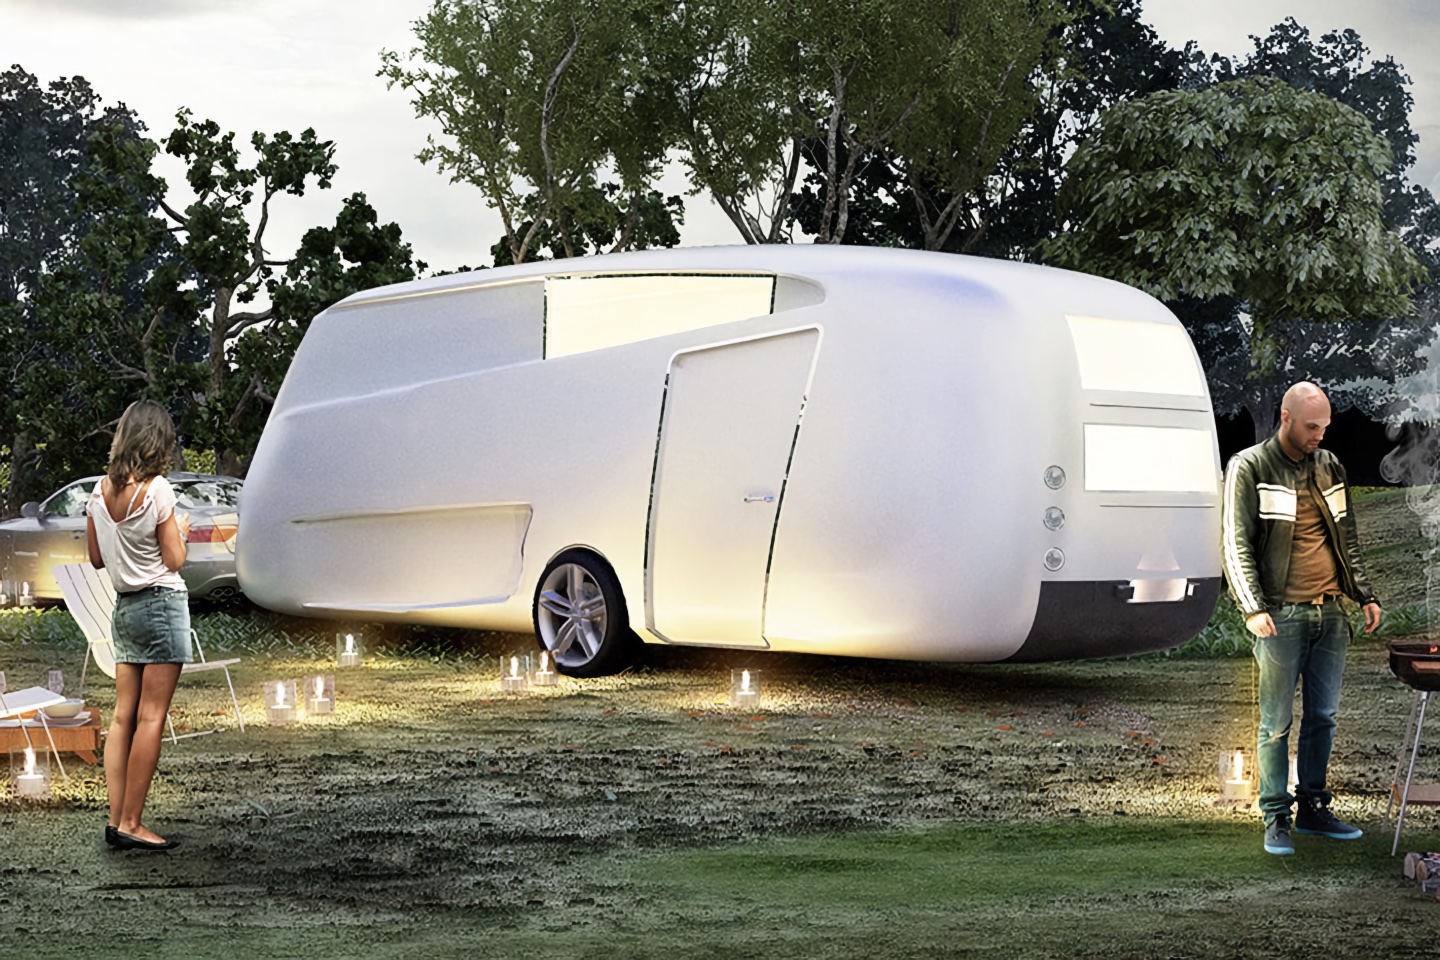 #Top 10 trailers designed to provide you with the ultimate glamping experience